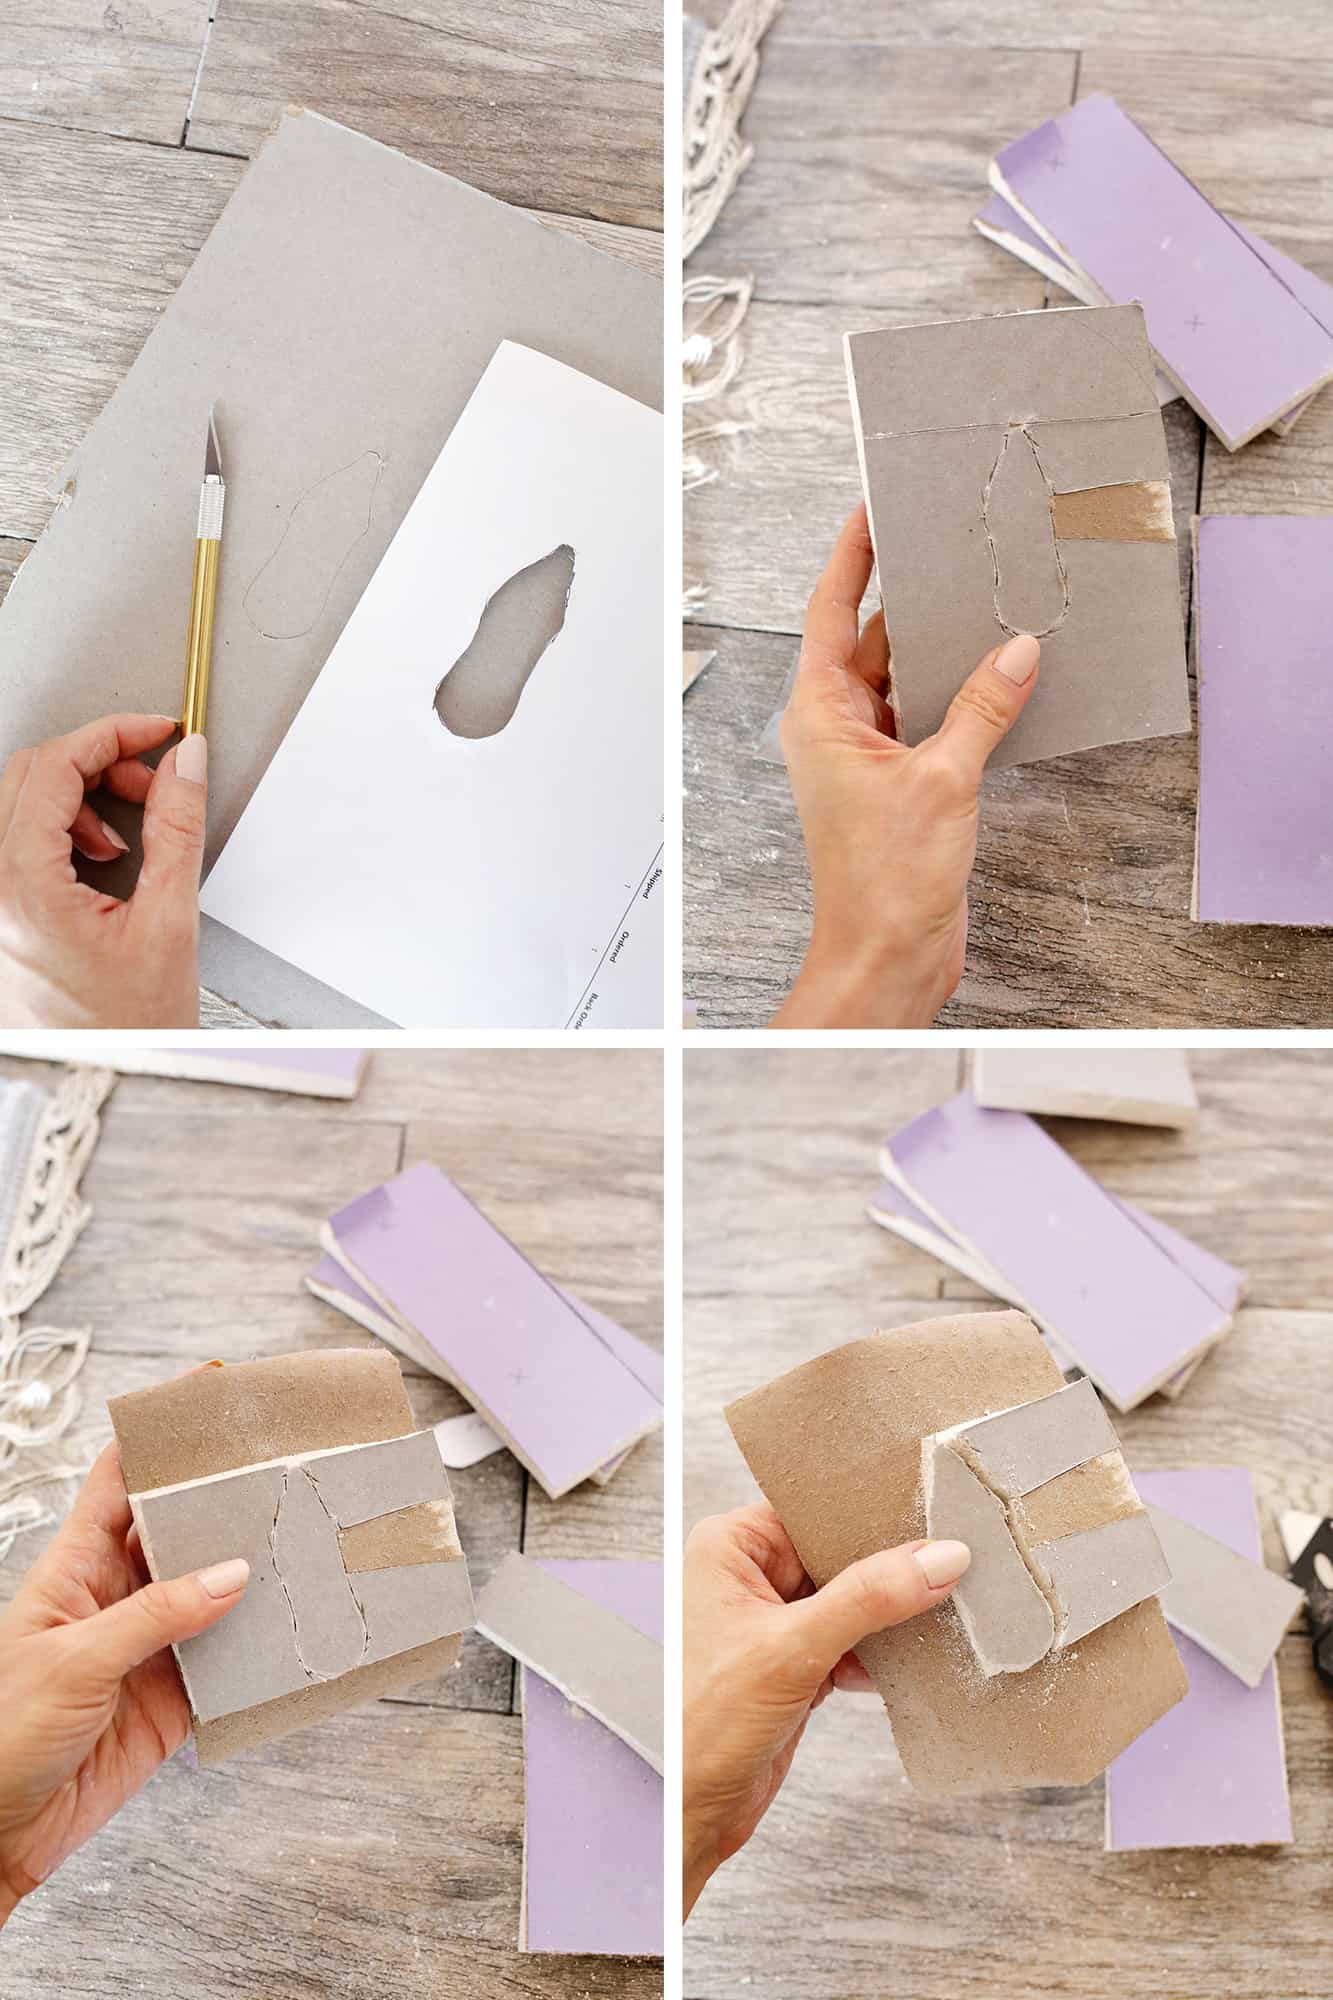 4 pictures of someone cutting out the shape of the hole in paper and in cardboard